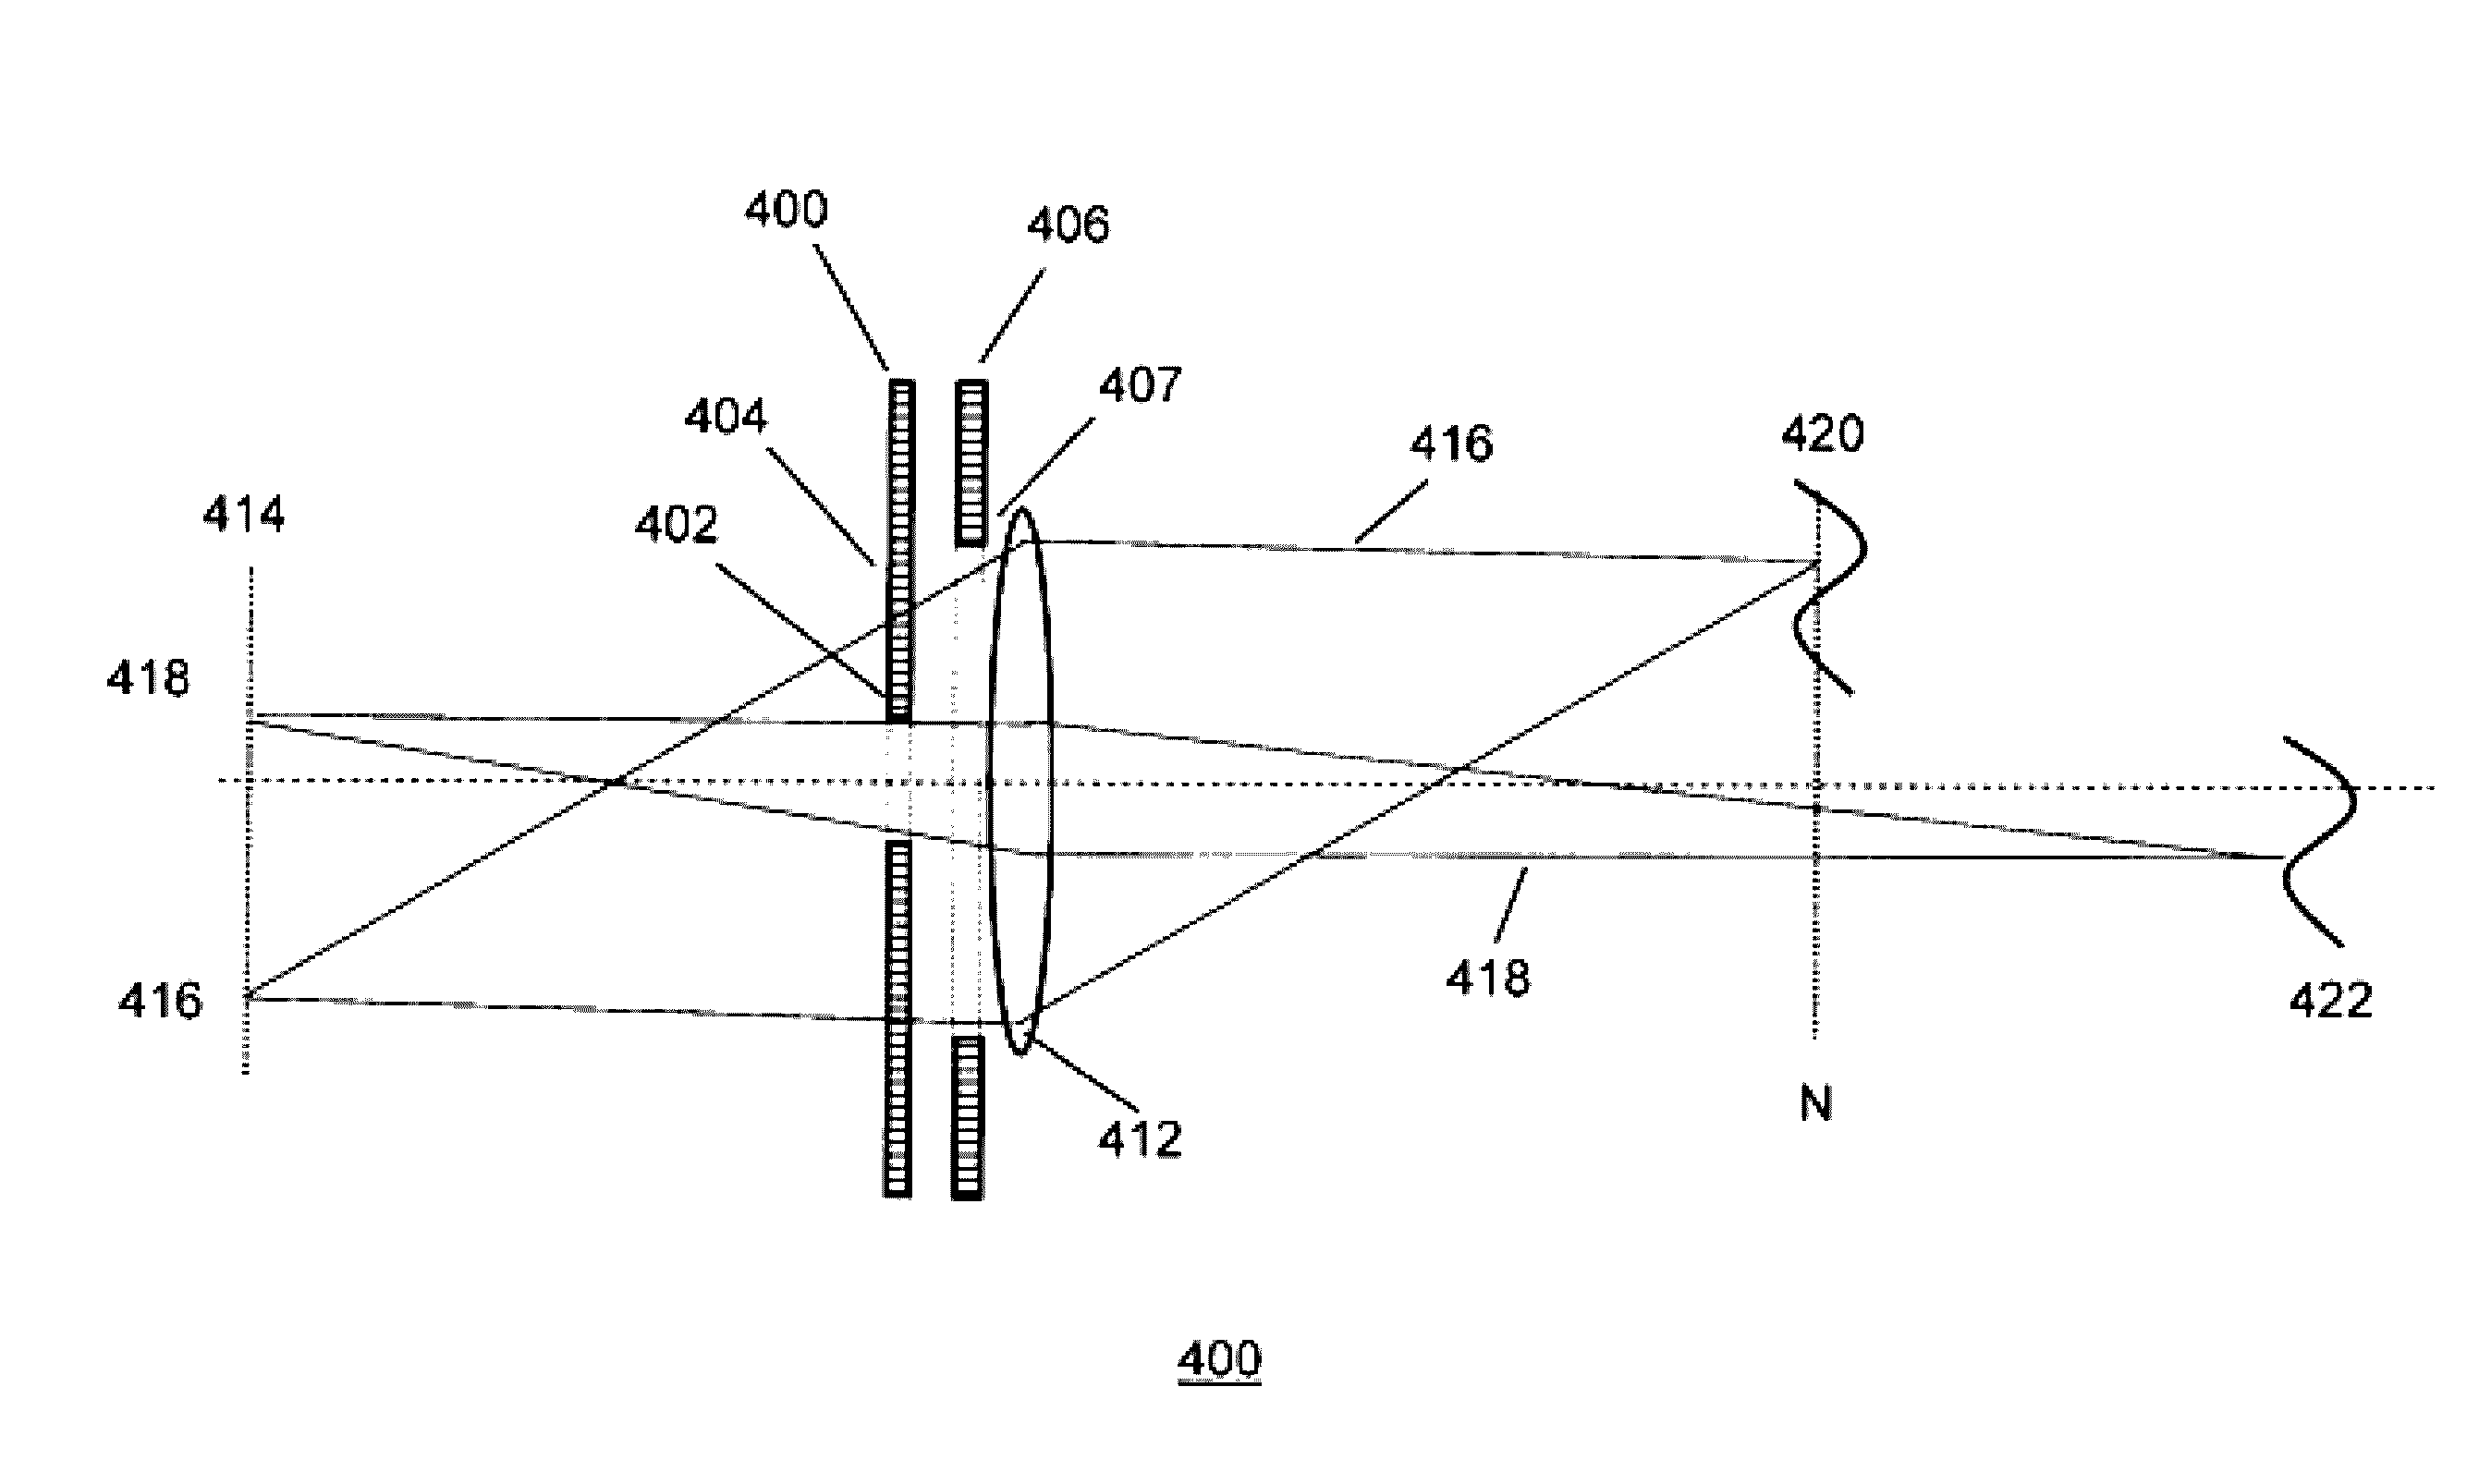 Processing Multi-Aperture Image Data for a Compound Imaging System